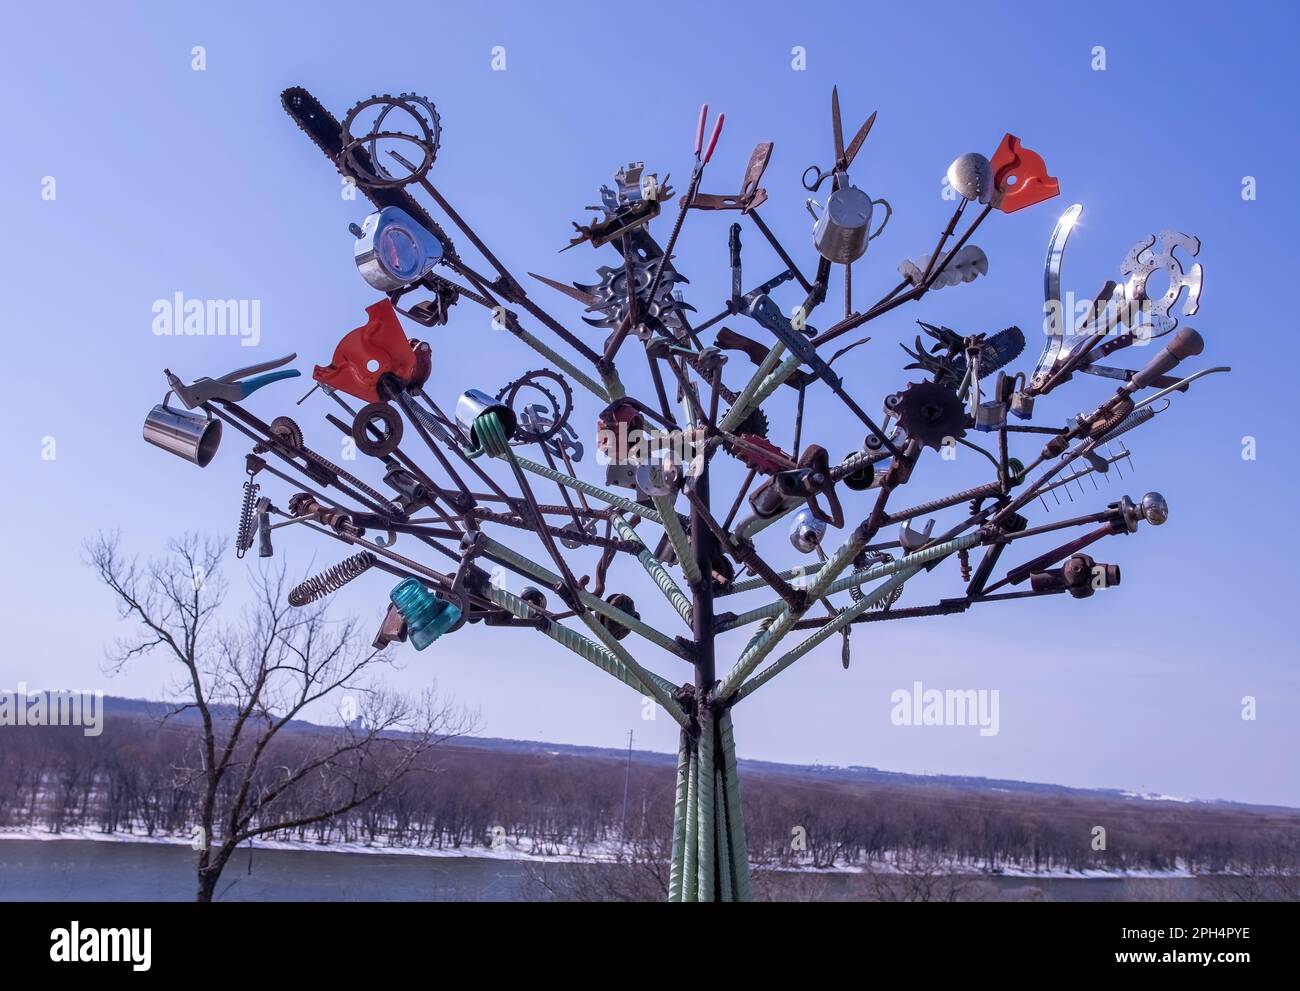 Art tree sculpture made from iron and metal materials with various gadgets on its limbs; at an overlook on the Mississippi River in Prescott, Wisconsi Stock Photo